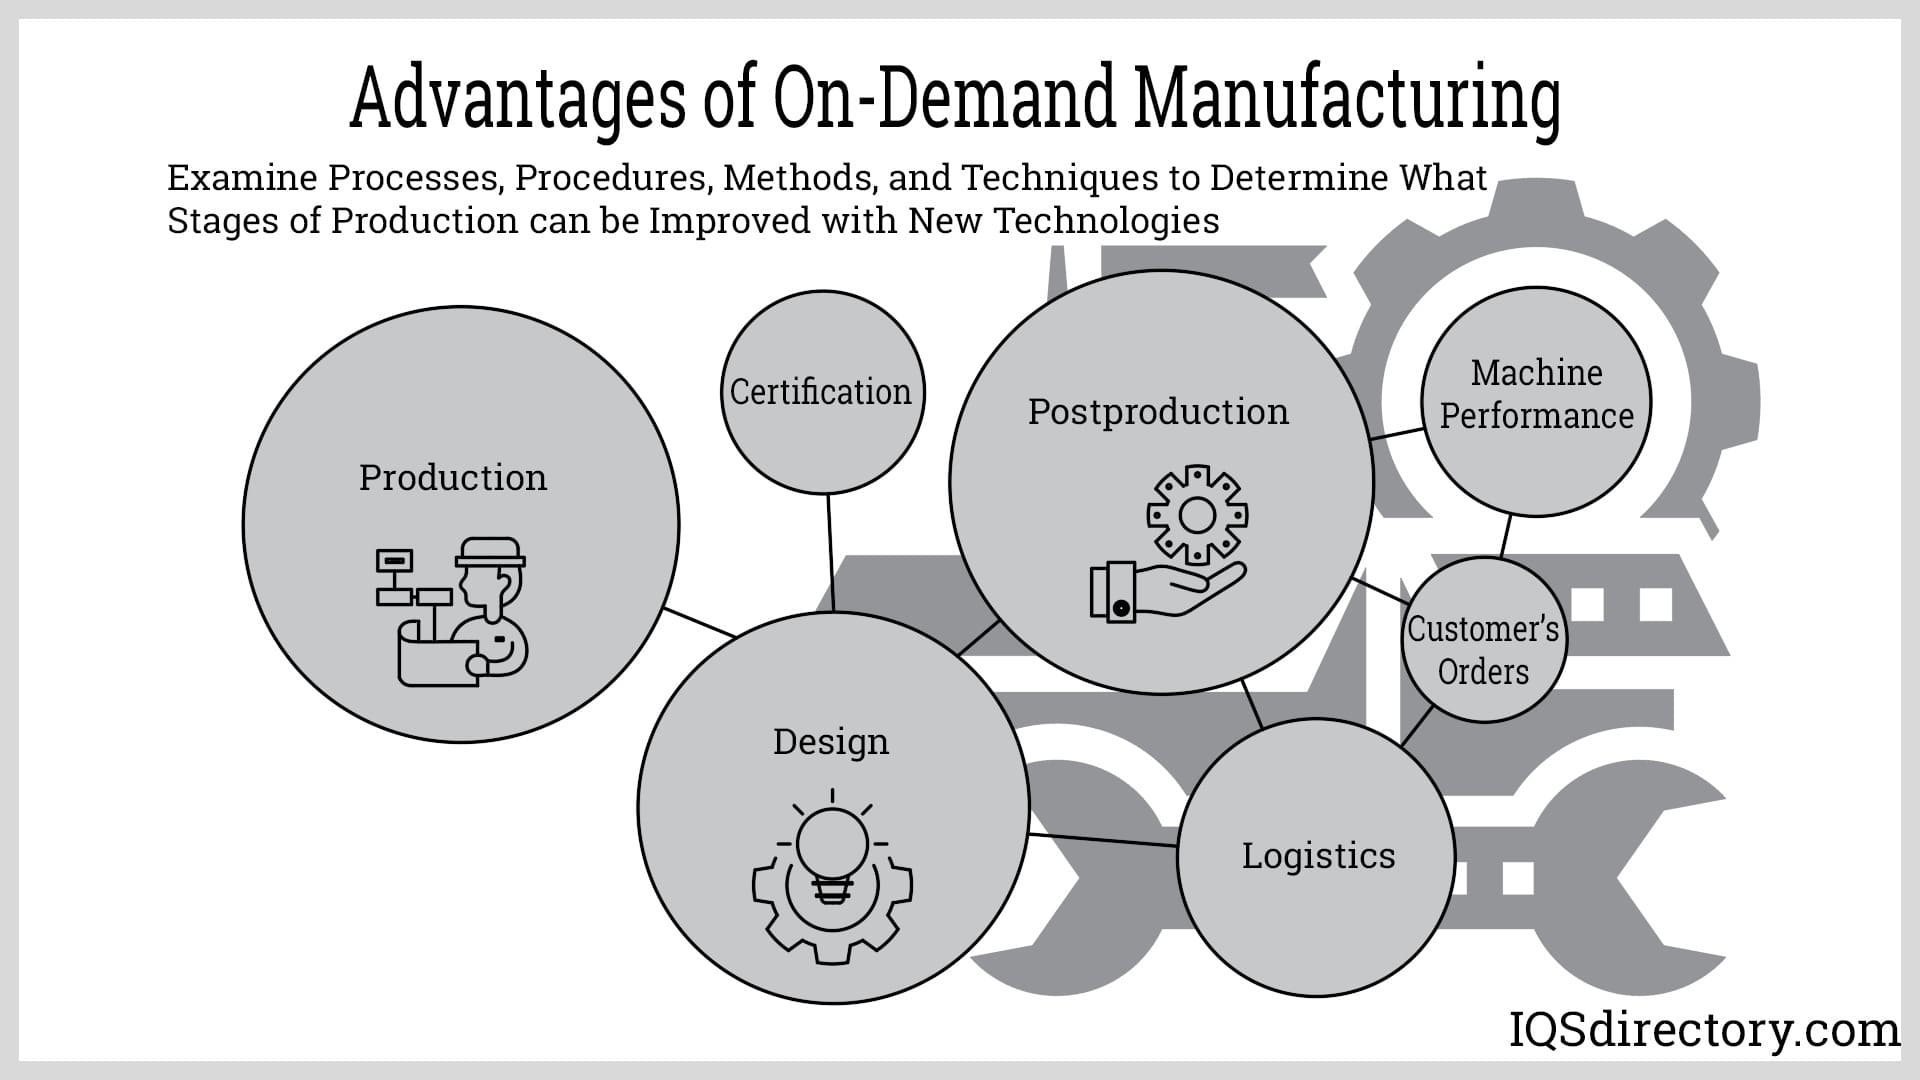 Advantages of On-Demand Manufacturing